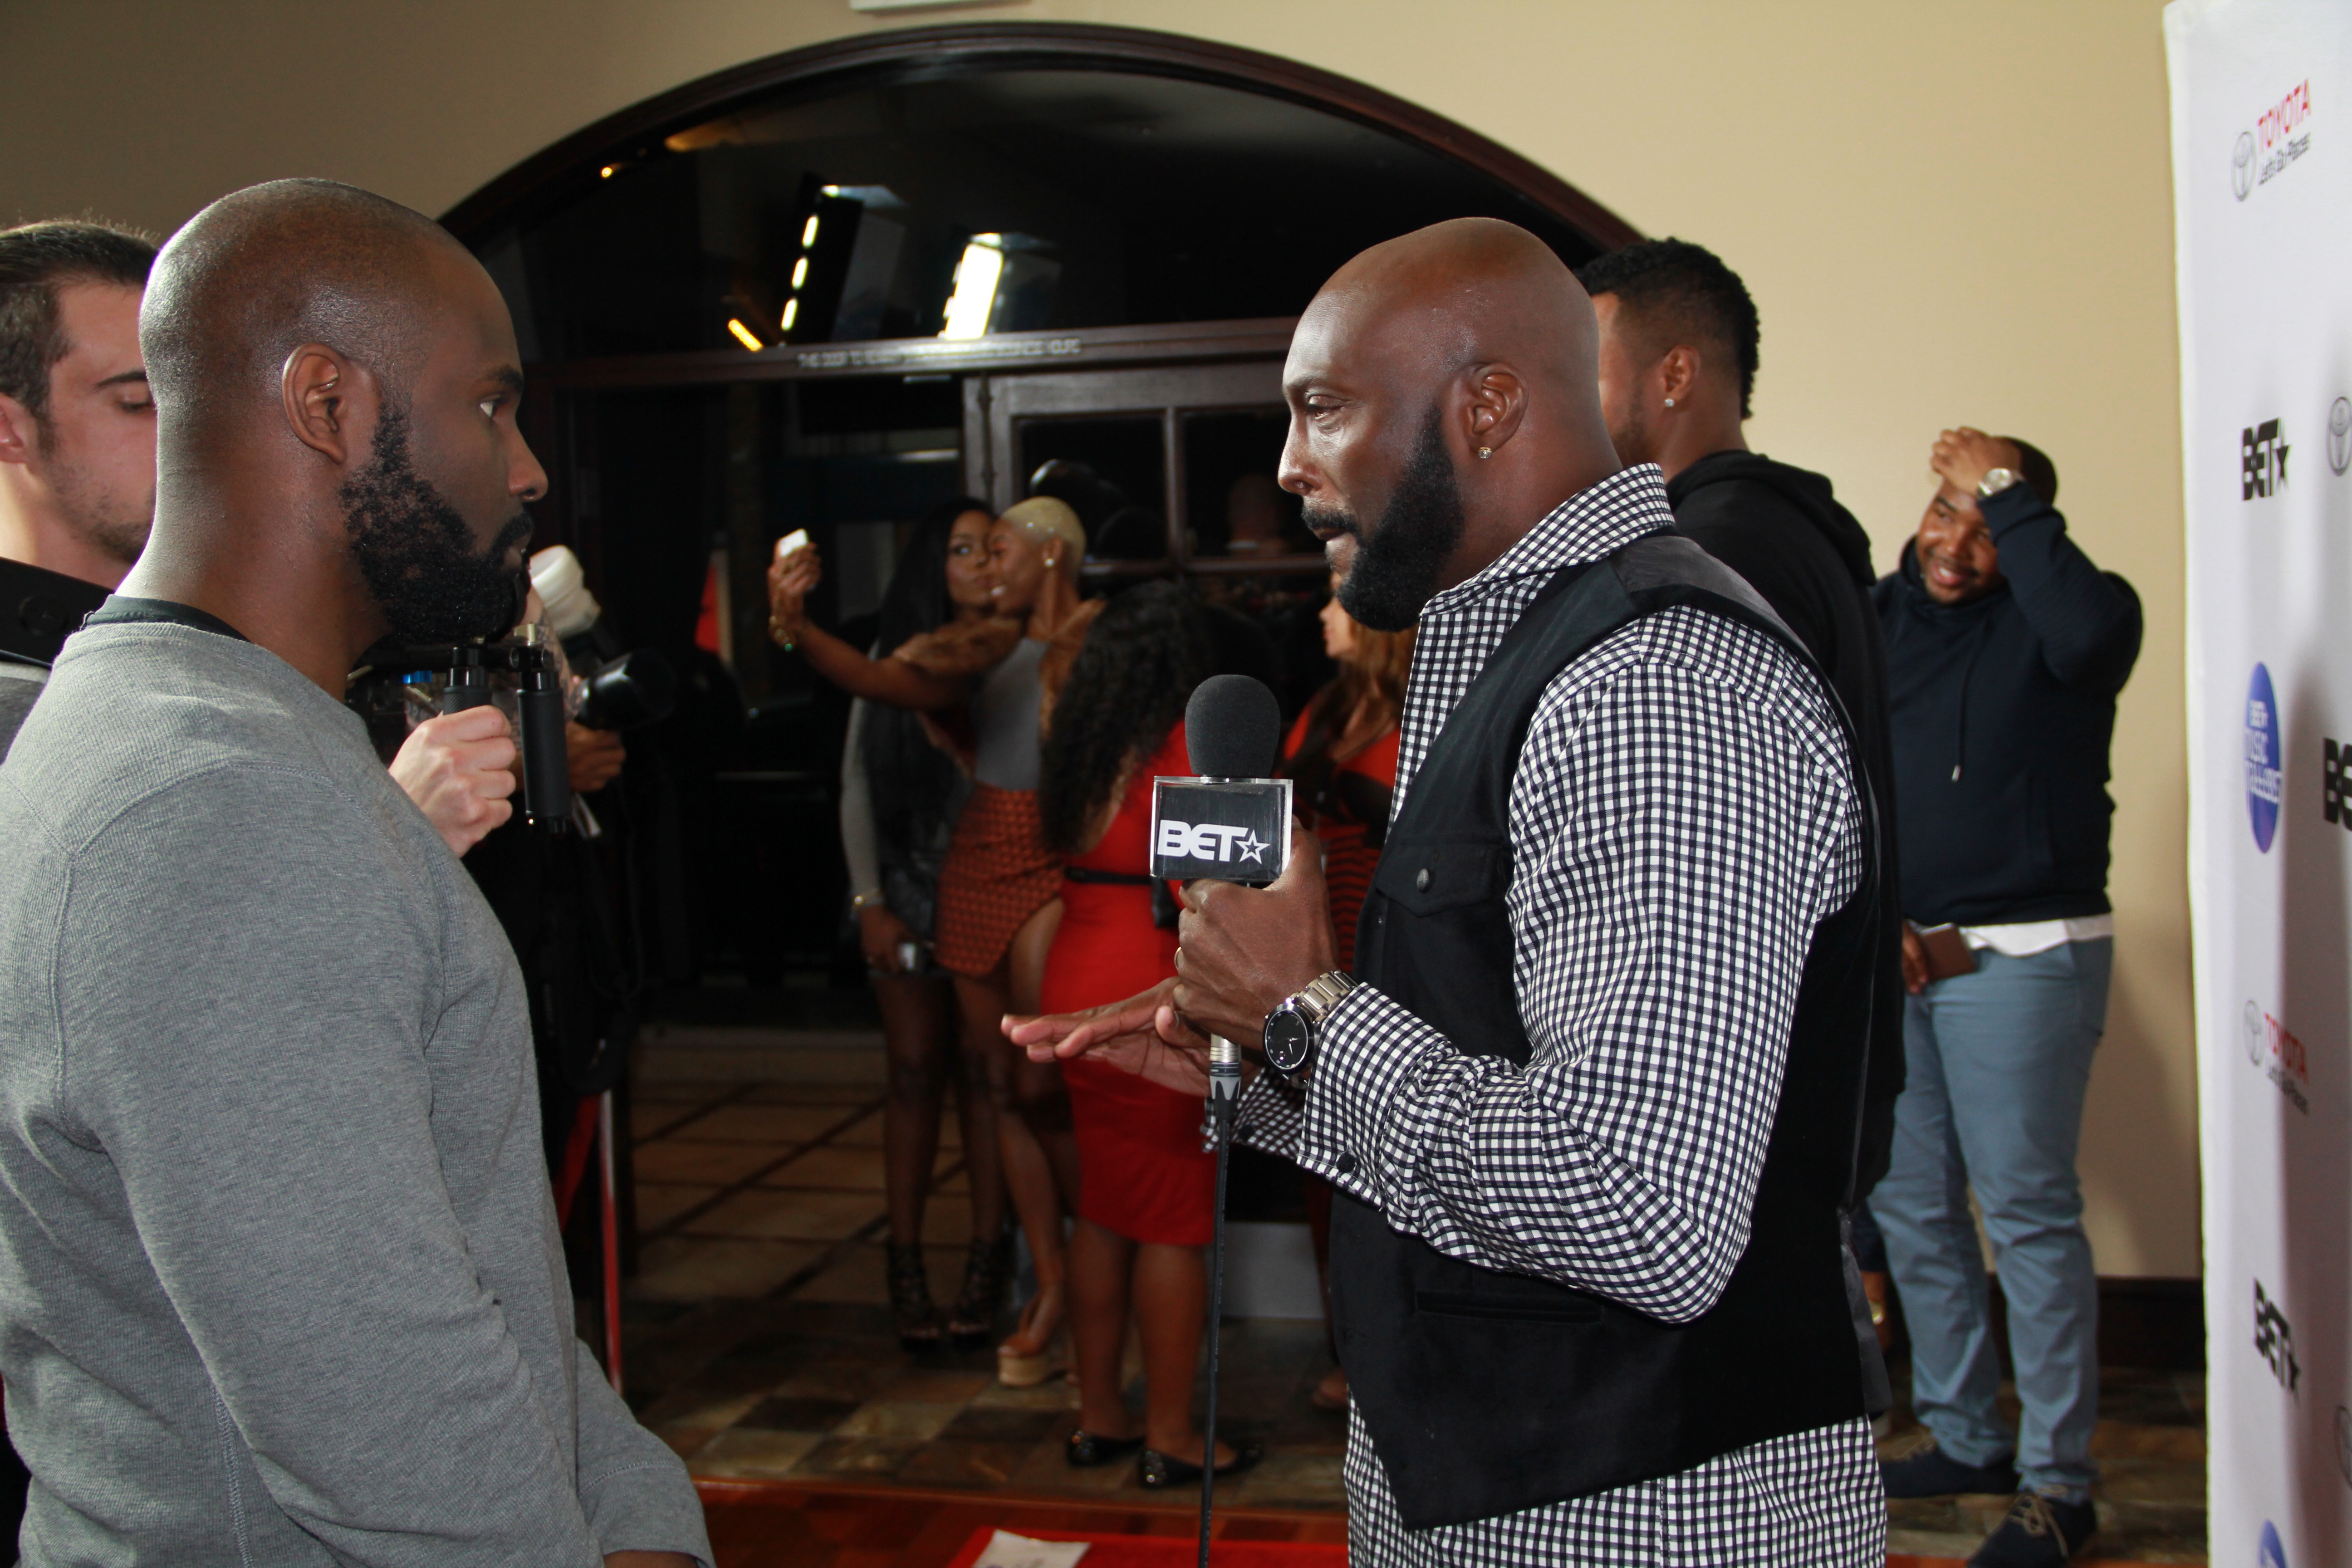 Ro Brooks being interviewed OTRC @ the B.E.T. Music Matters Event.